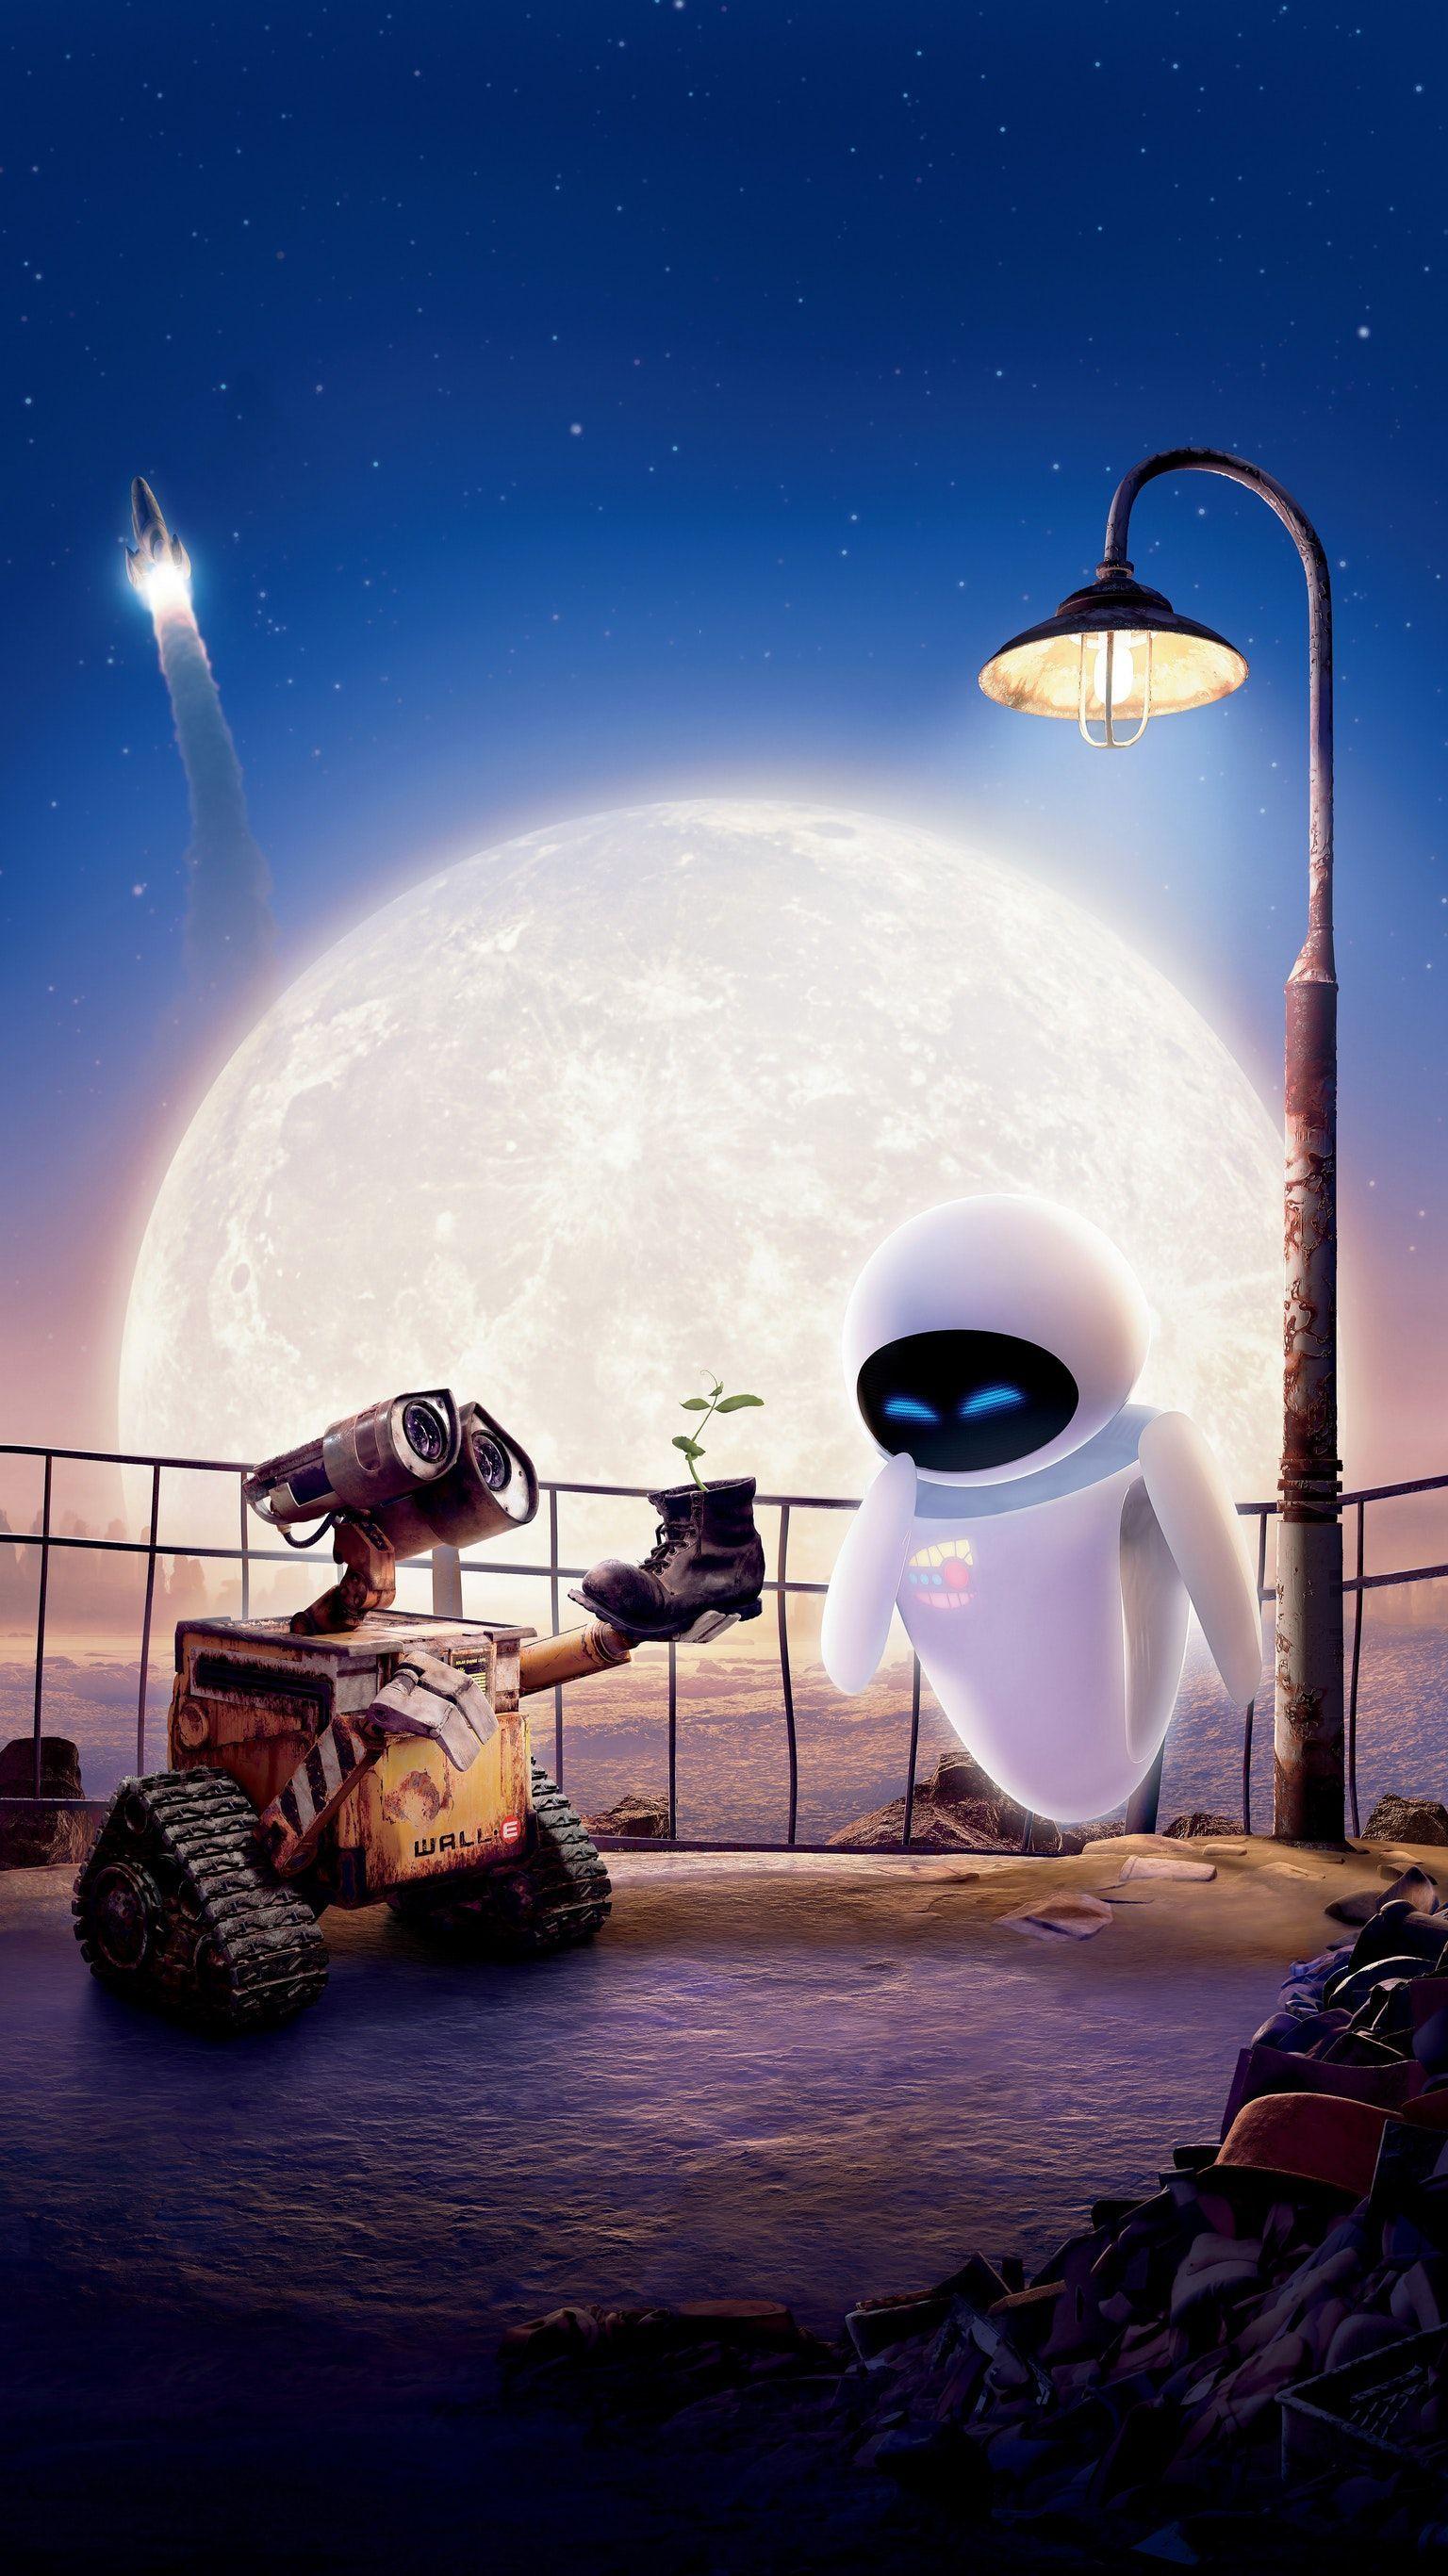 Wall E IPhone Wallpaper Free Wall E IPhone Background